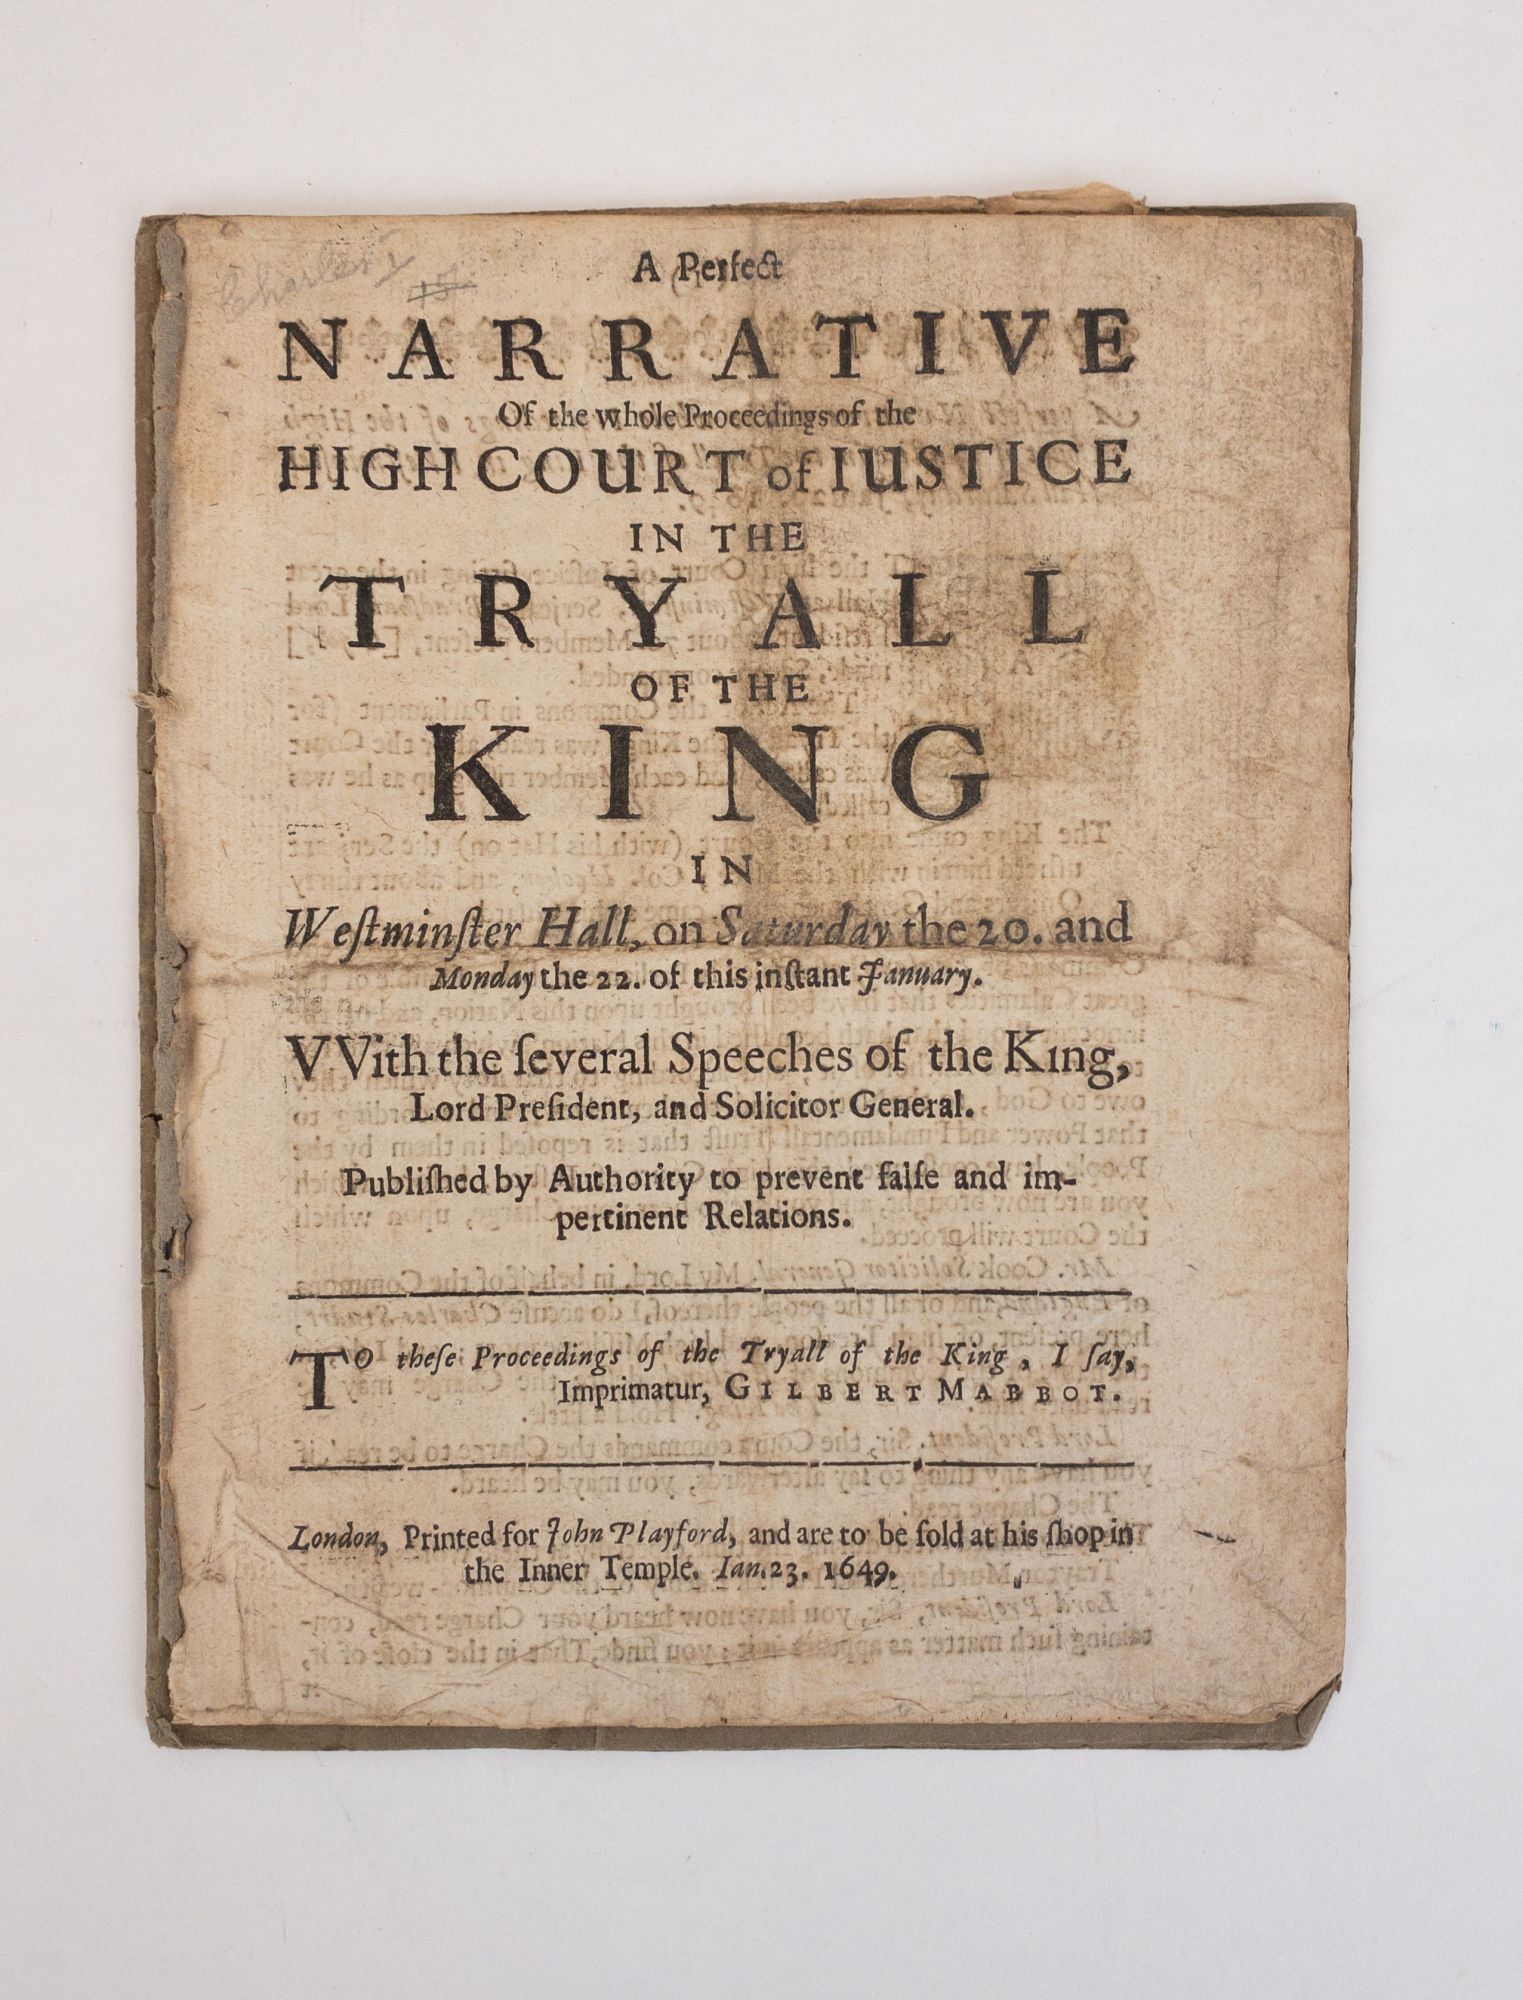 1353500 A PERFECT NARRATIVE OF THE WHOLE PROCEEDINGS OF THE HIGH COURT OF IUSTICE IN THE TRYALL OF THE KING IN WESTMINSTER HALL; [Bound with] COLLECTIONS OF NOTES TAKEN AT THE KING'S TRYALL, AT WESTMINSTER HALL, ON MUNDAY LAST, JANUA. 22.1648. [Two Works Bound Together]